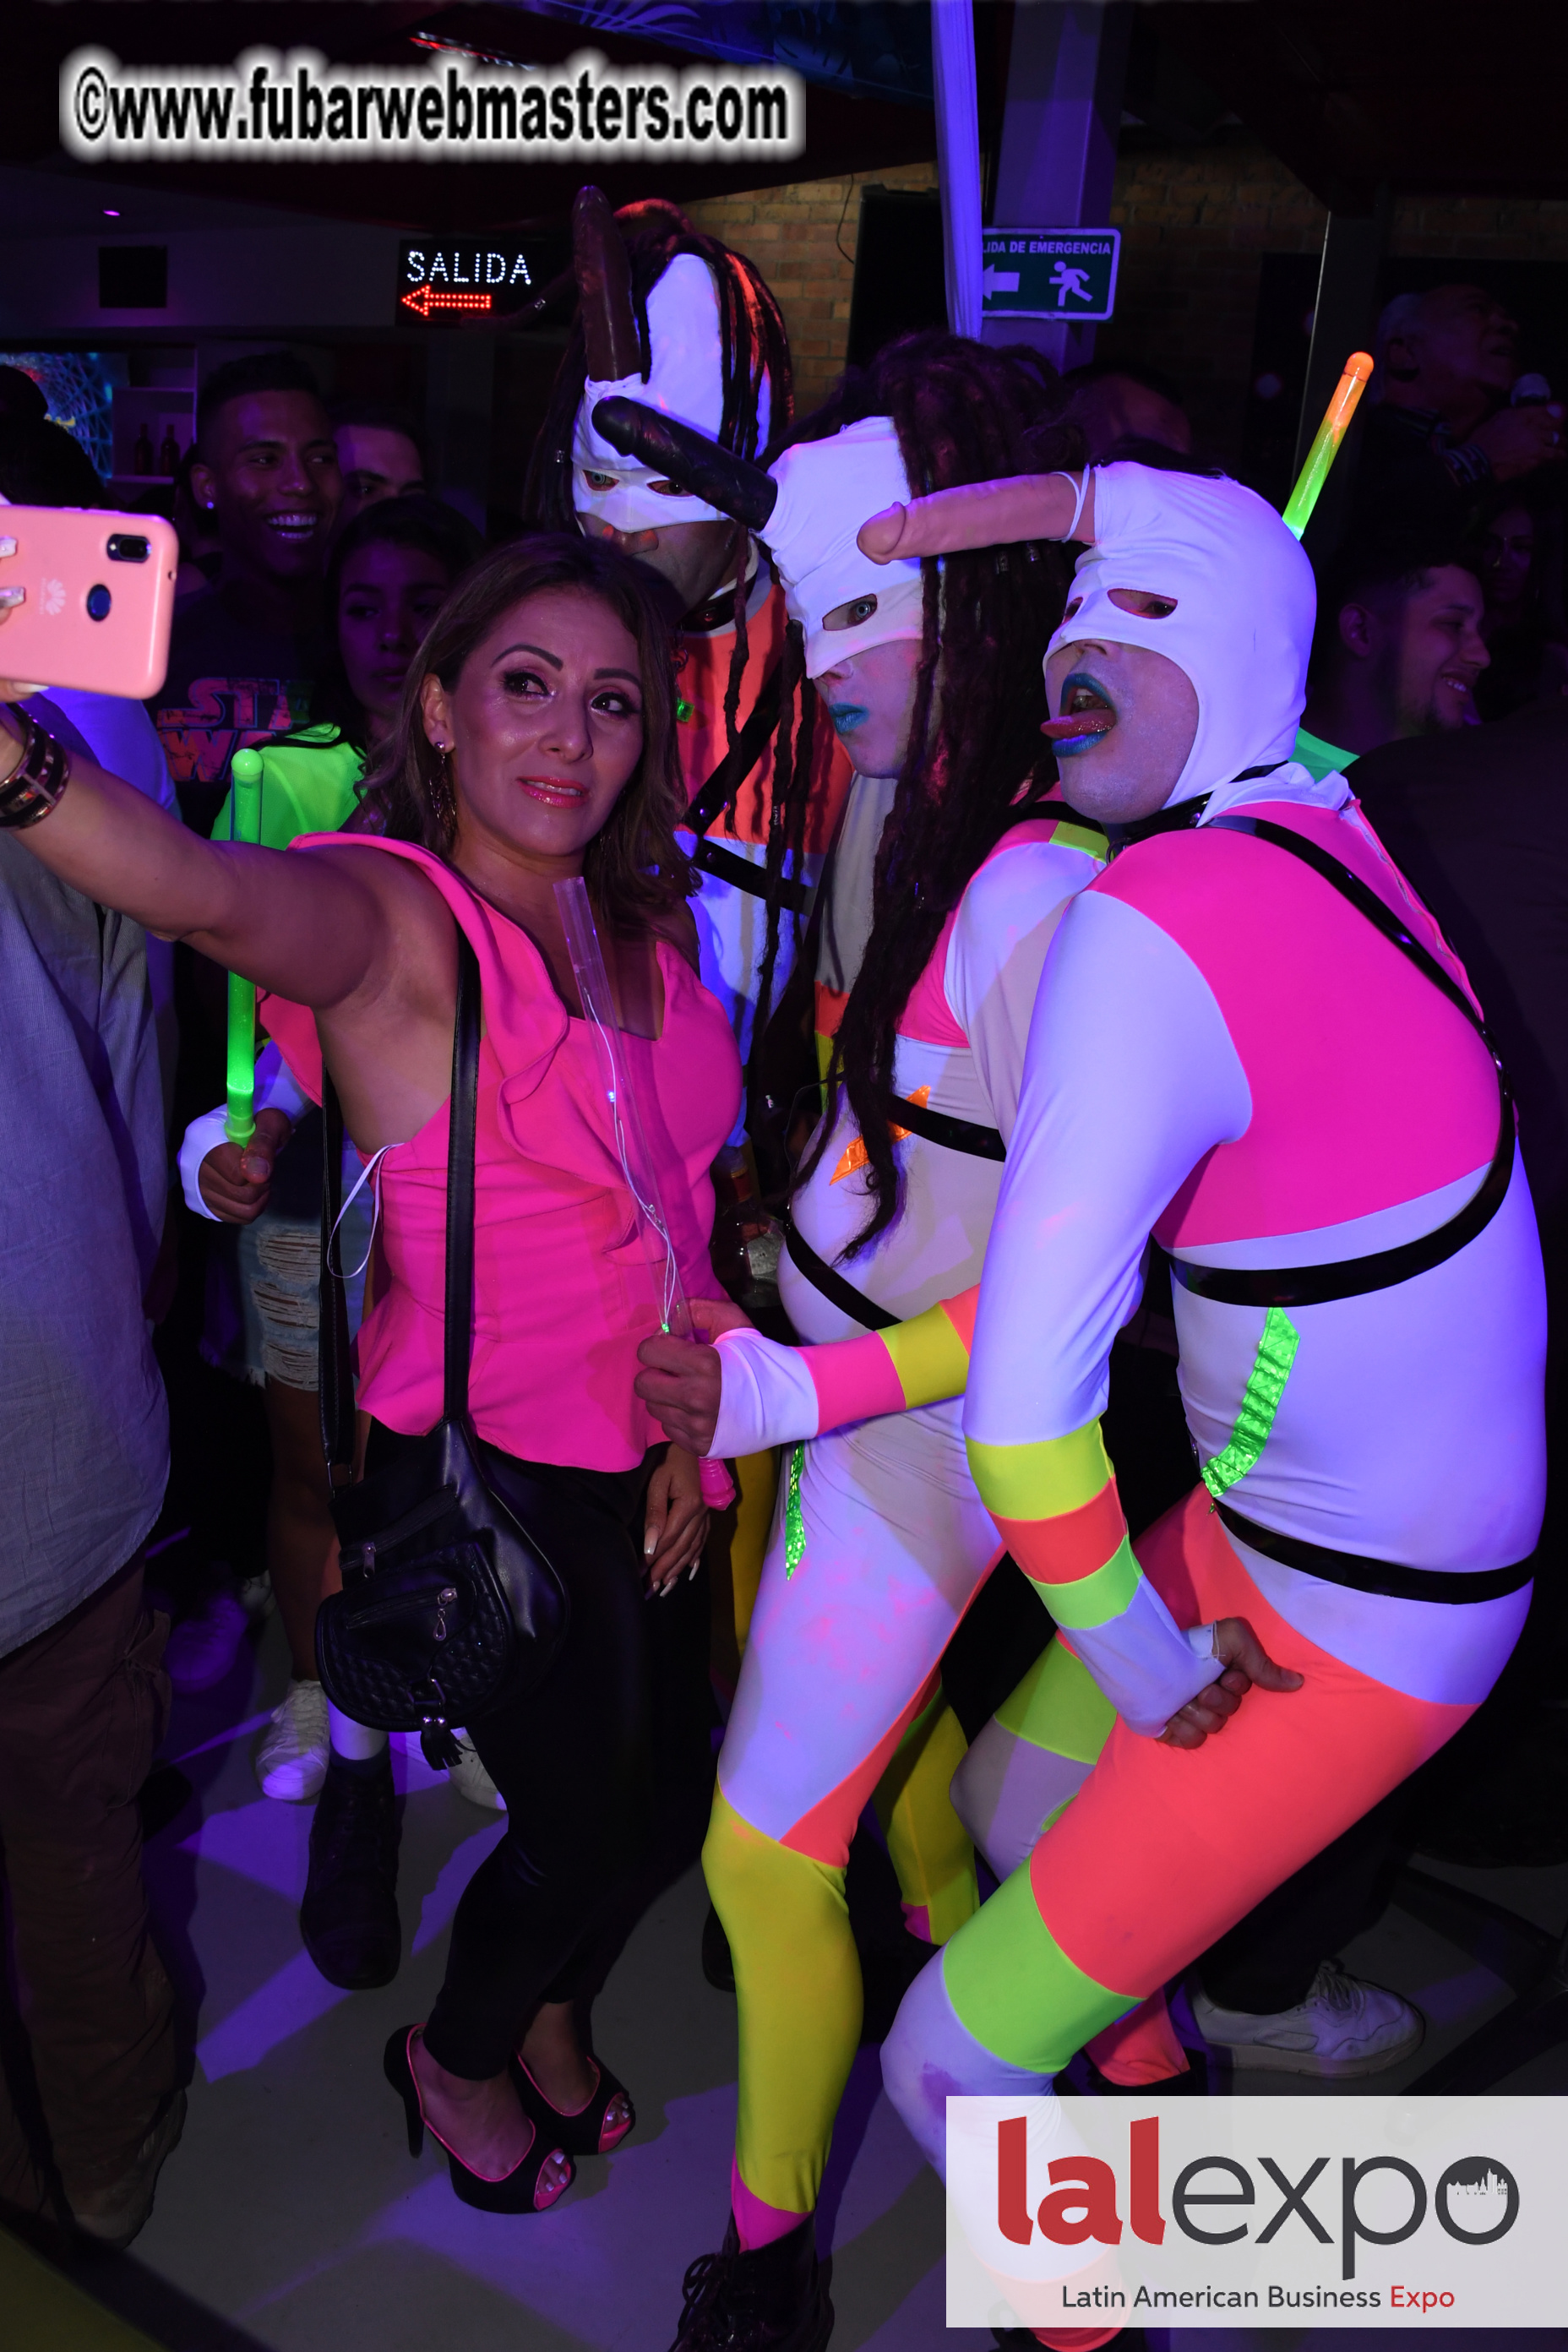 Chaturbate Neon Party